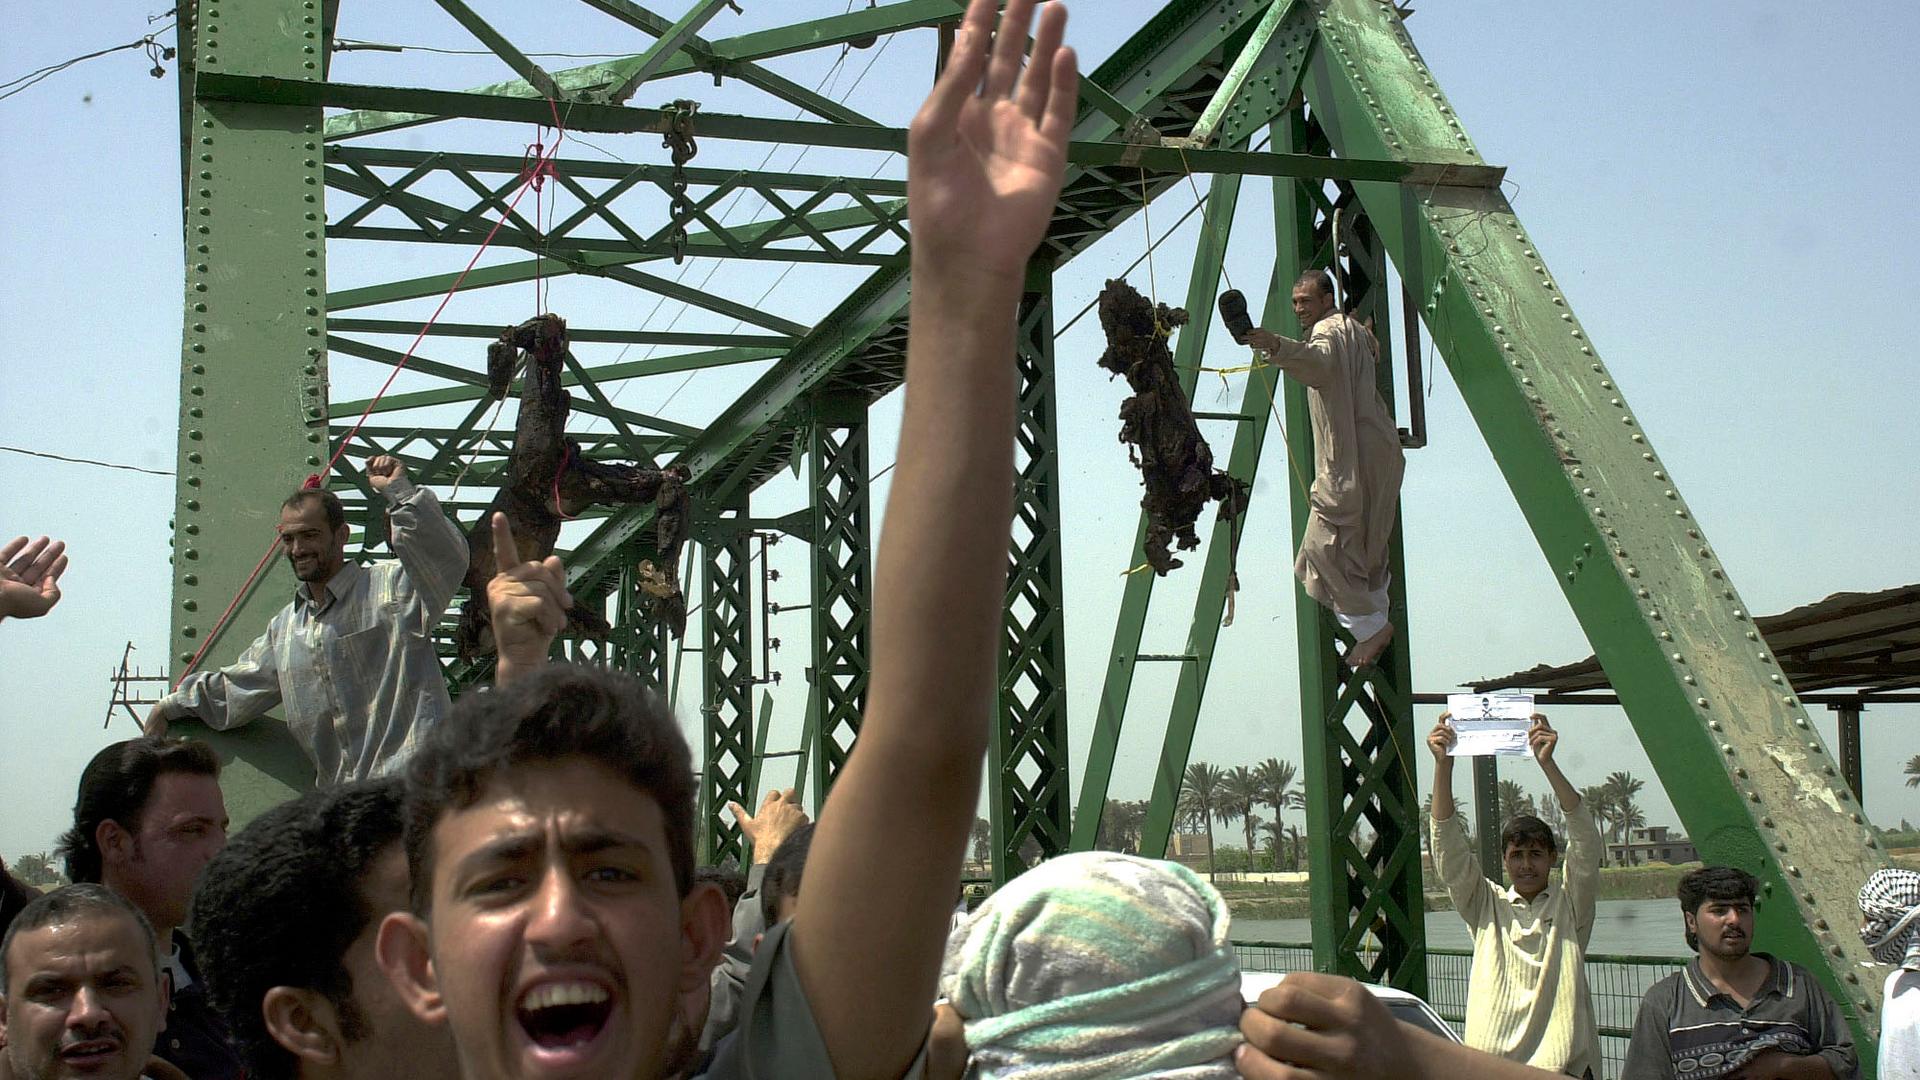 Iraqis chant anti-American slogans as charred bodies hang from a bridge over the Euphrates River in Fallujah, west of Baghdad, in 2004.